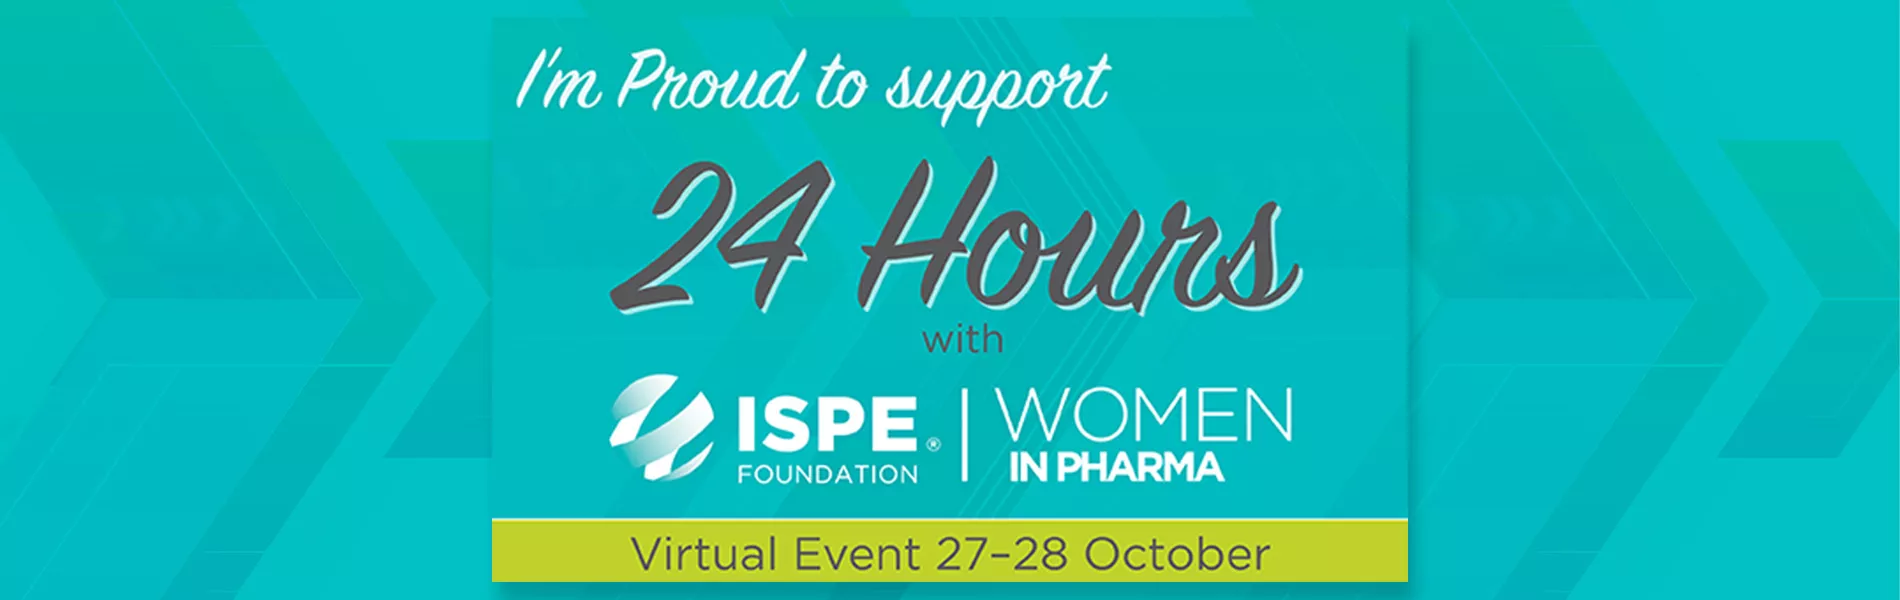 Growth of the Women in Pharma at ISPE